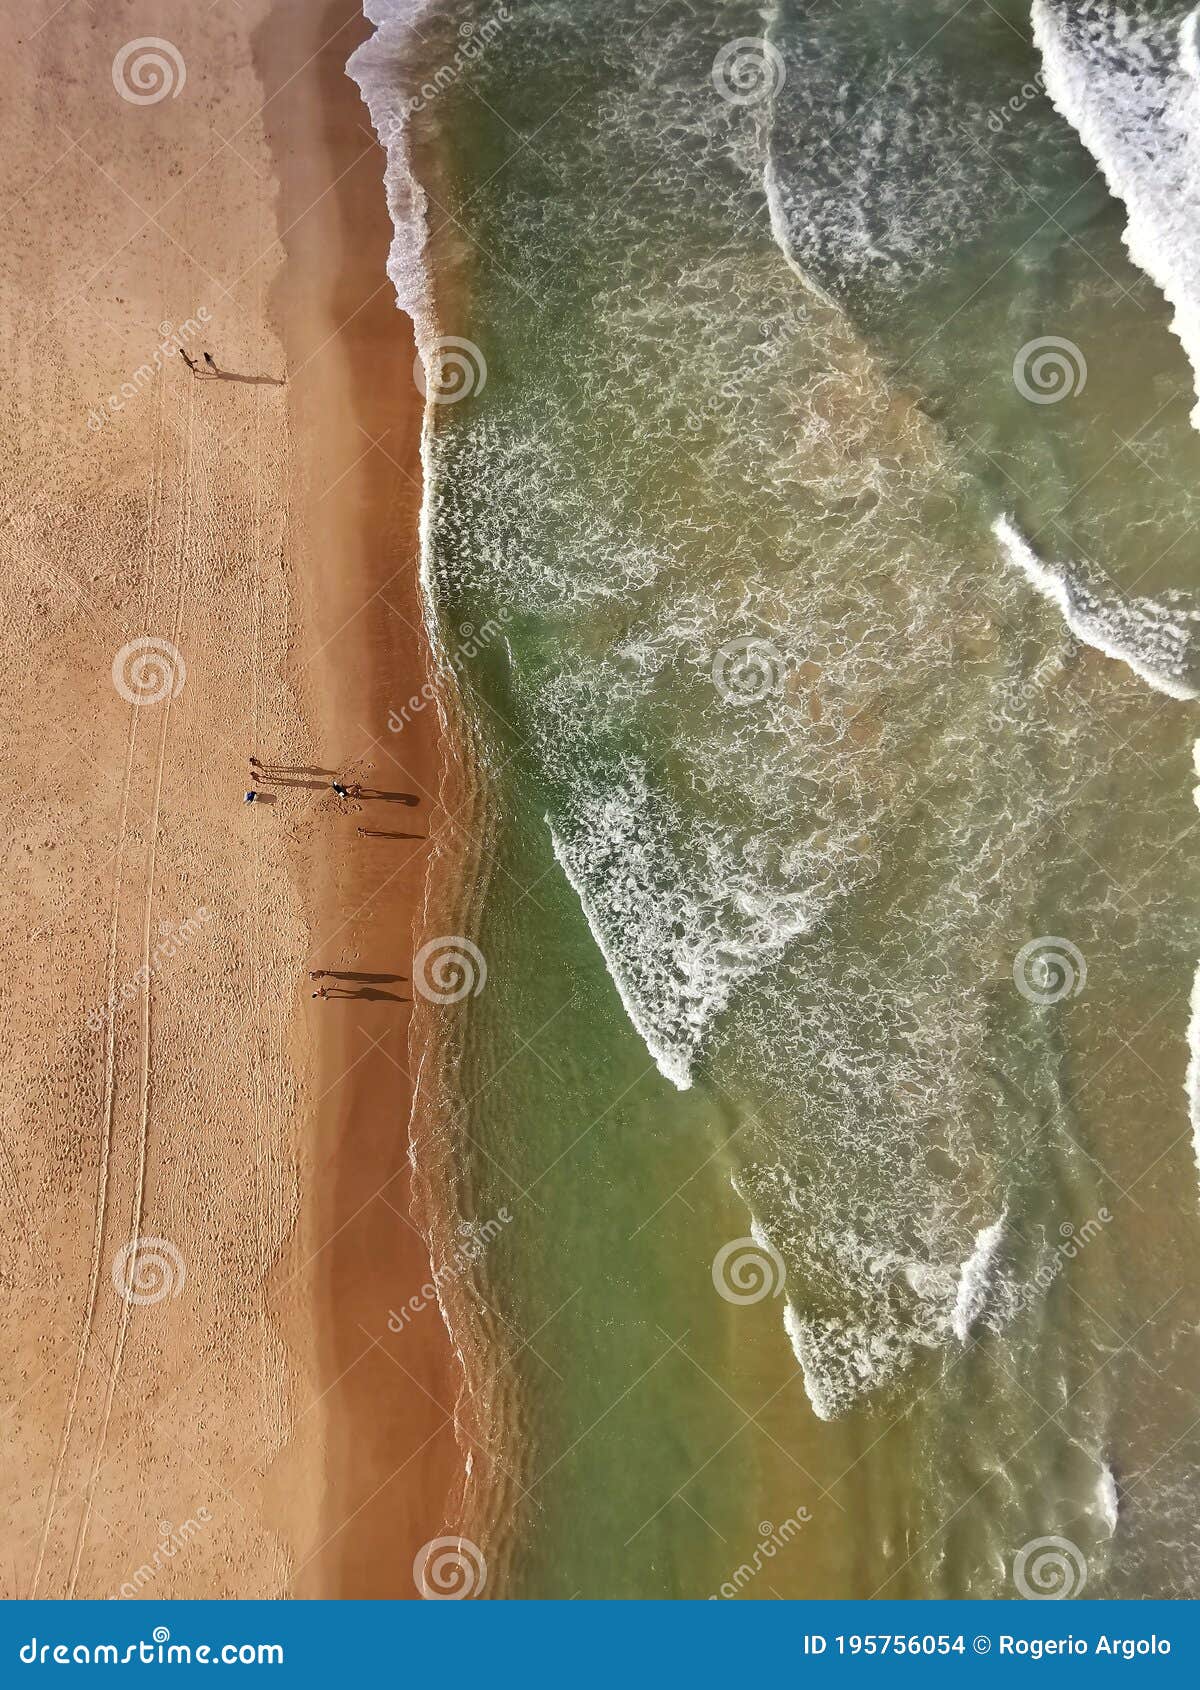 aerial view of the sea and people in the sand at praia do futuro beach, fortaleza, cearÃÂ¡ brazil